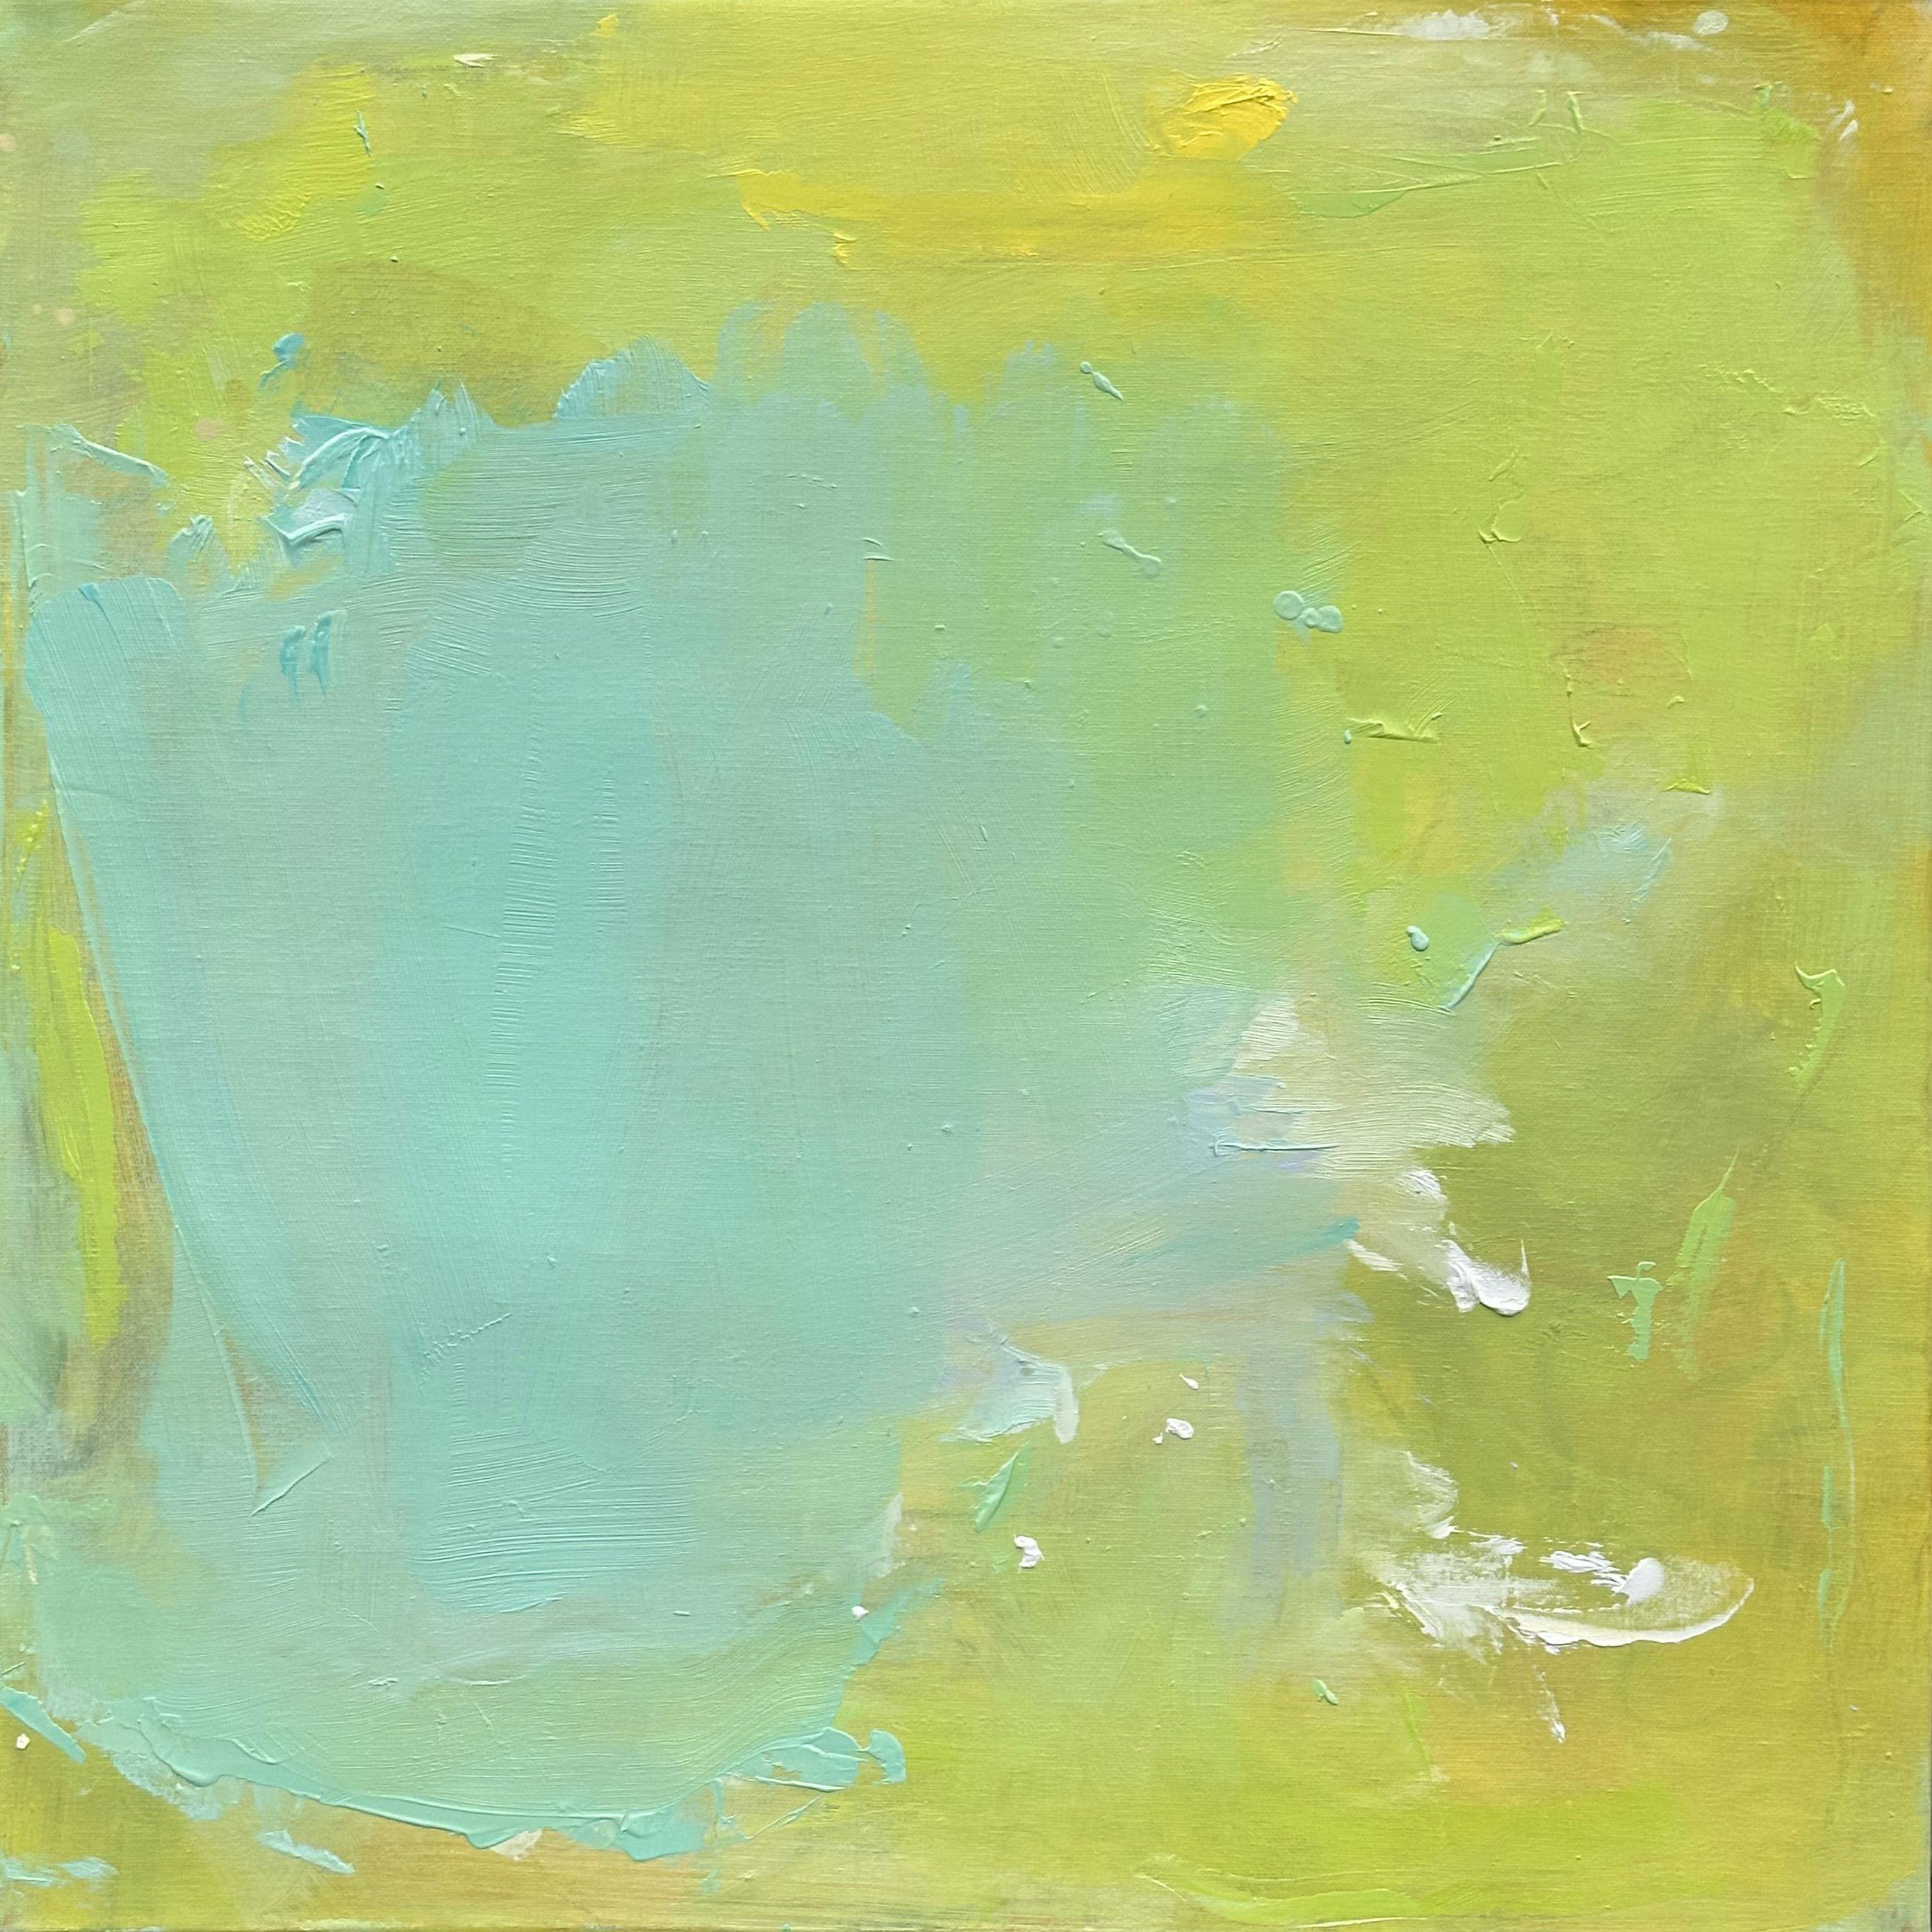 "Spring Palette" is an abstract expressionist oil painting on canvas by Trixie Pitts. The palette is delightfully fresh and uplifting and consists of different yellow hues, bright light green, chartreuse, robin's egg turquoise, sky blue and white.